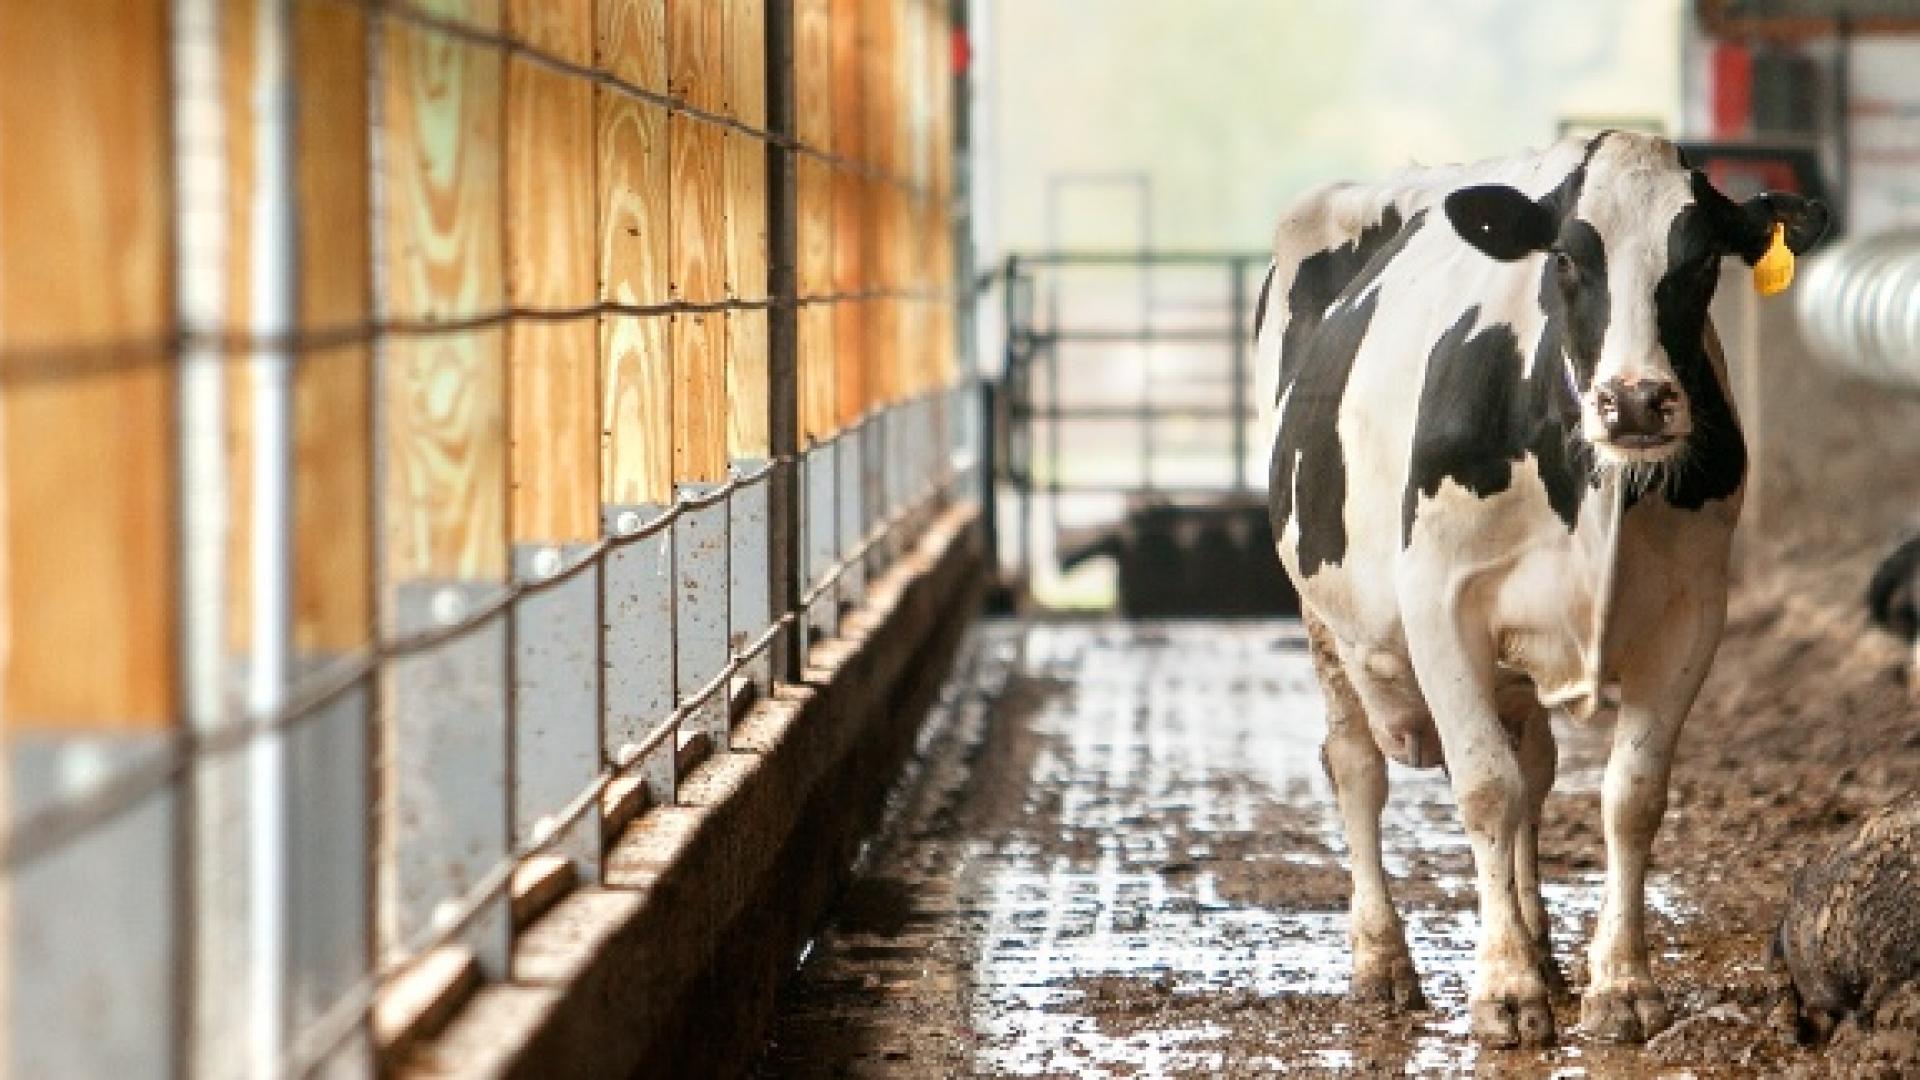 How Much A Good Dairy Cow Should Cost?